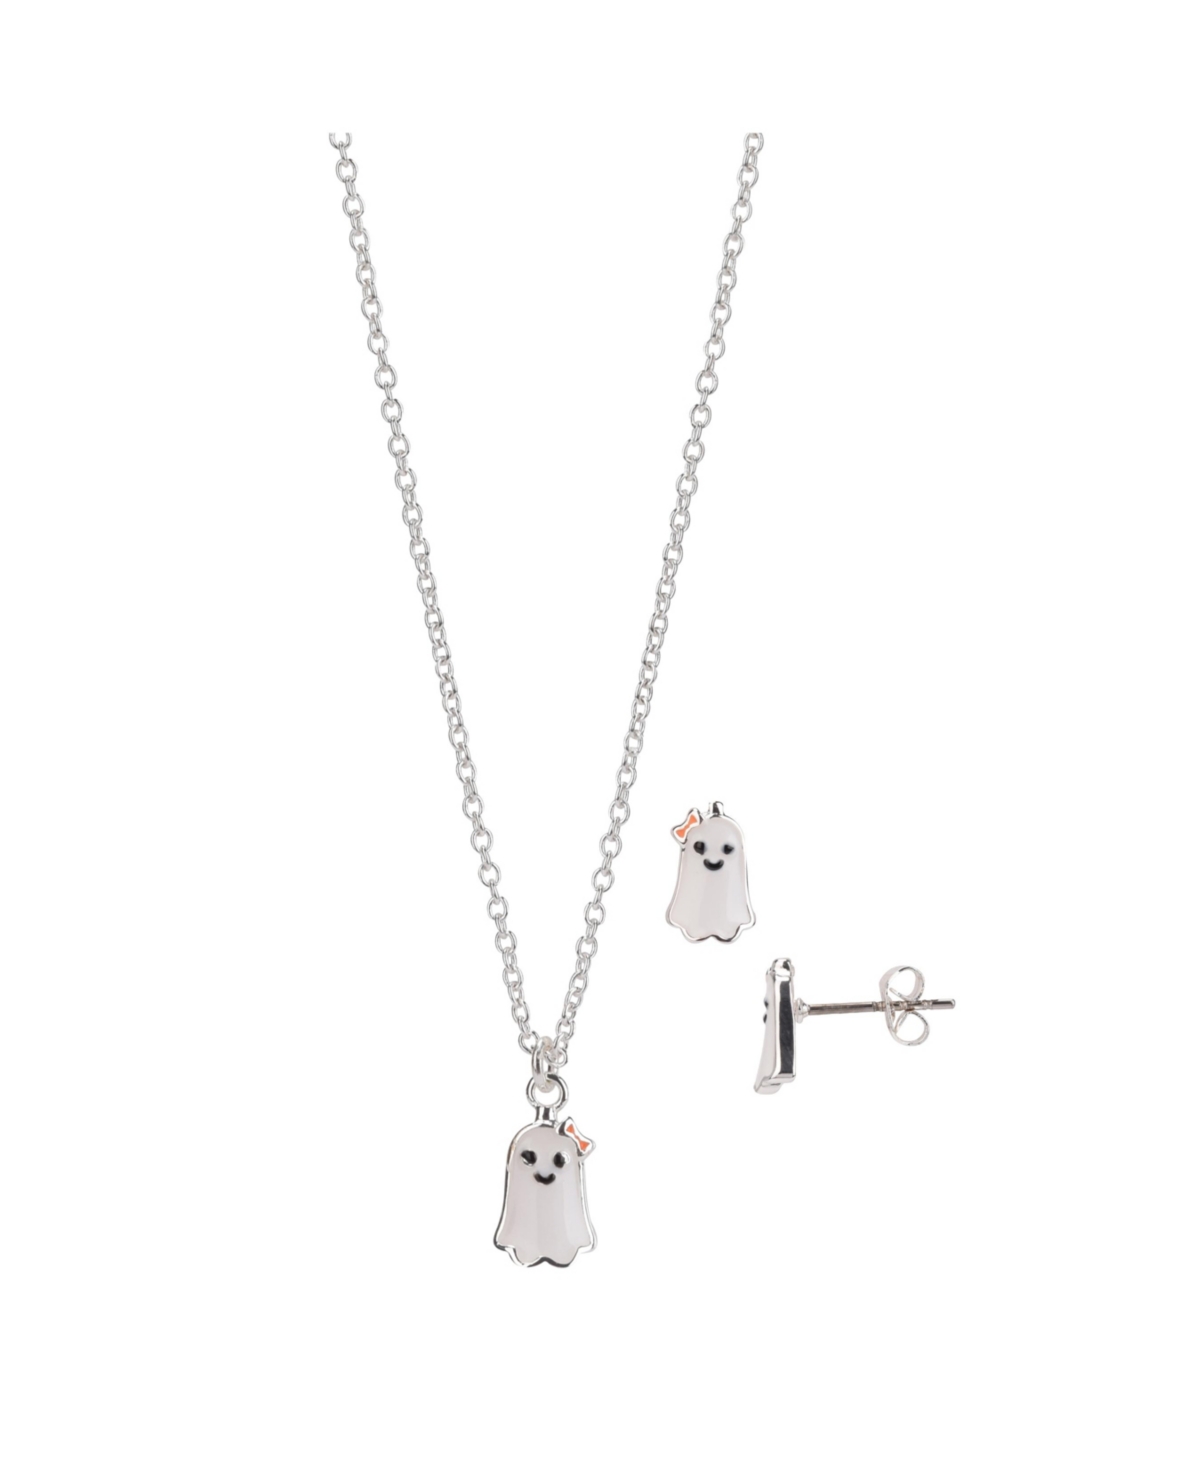 Fao Schwarz Silver Tone Ghost Necklace And Earring Set, 3 Pieces In White